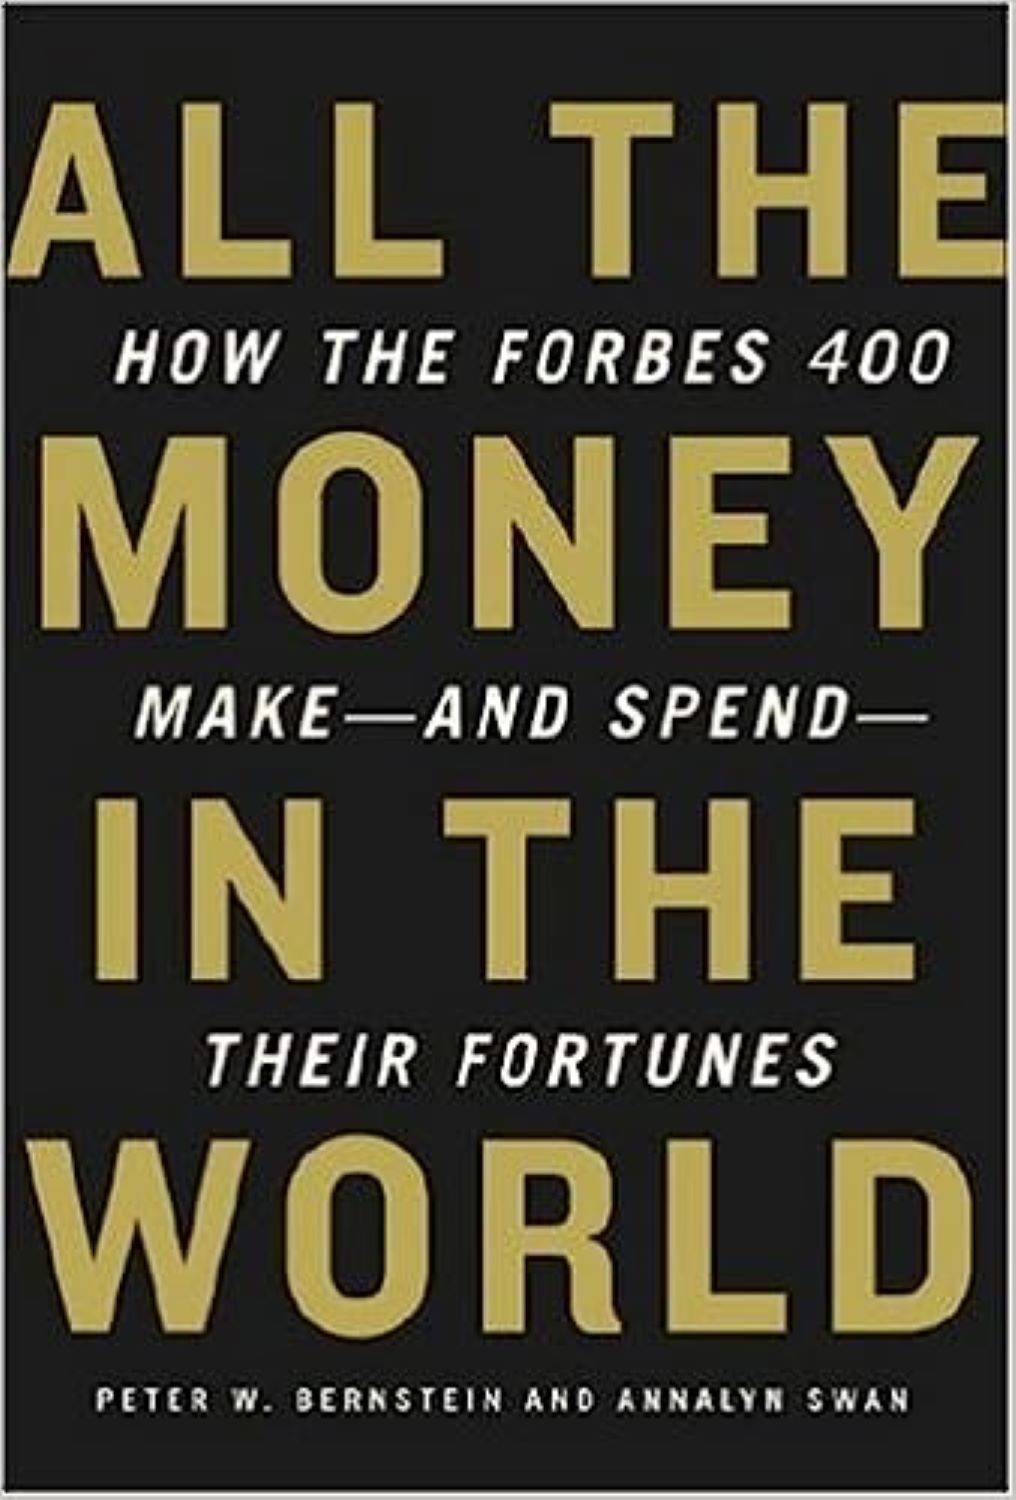 All The Money in the World by Peter W. Bernstein and Annalyn Swan